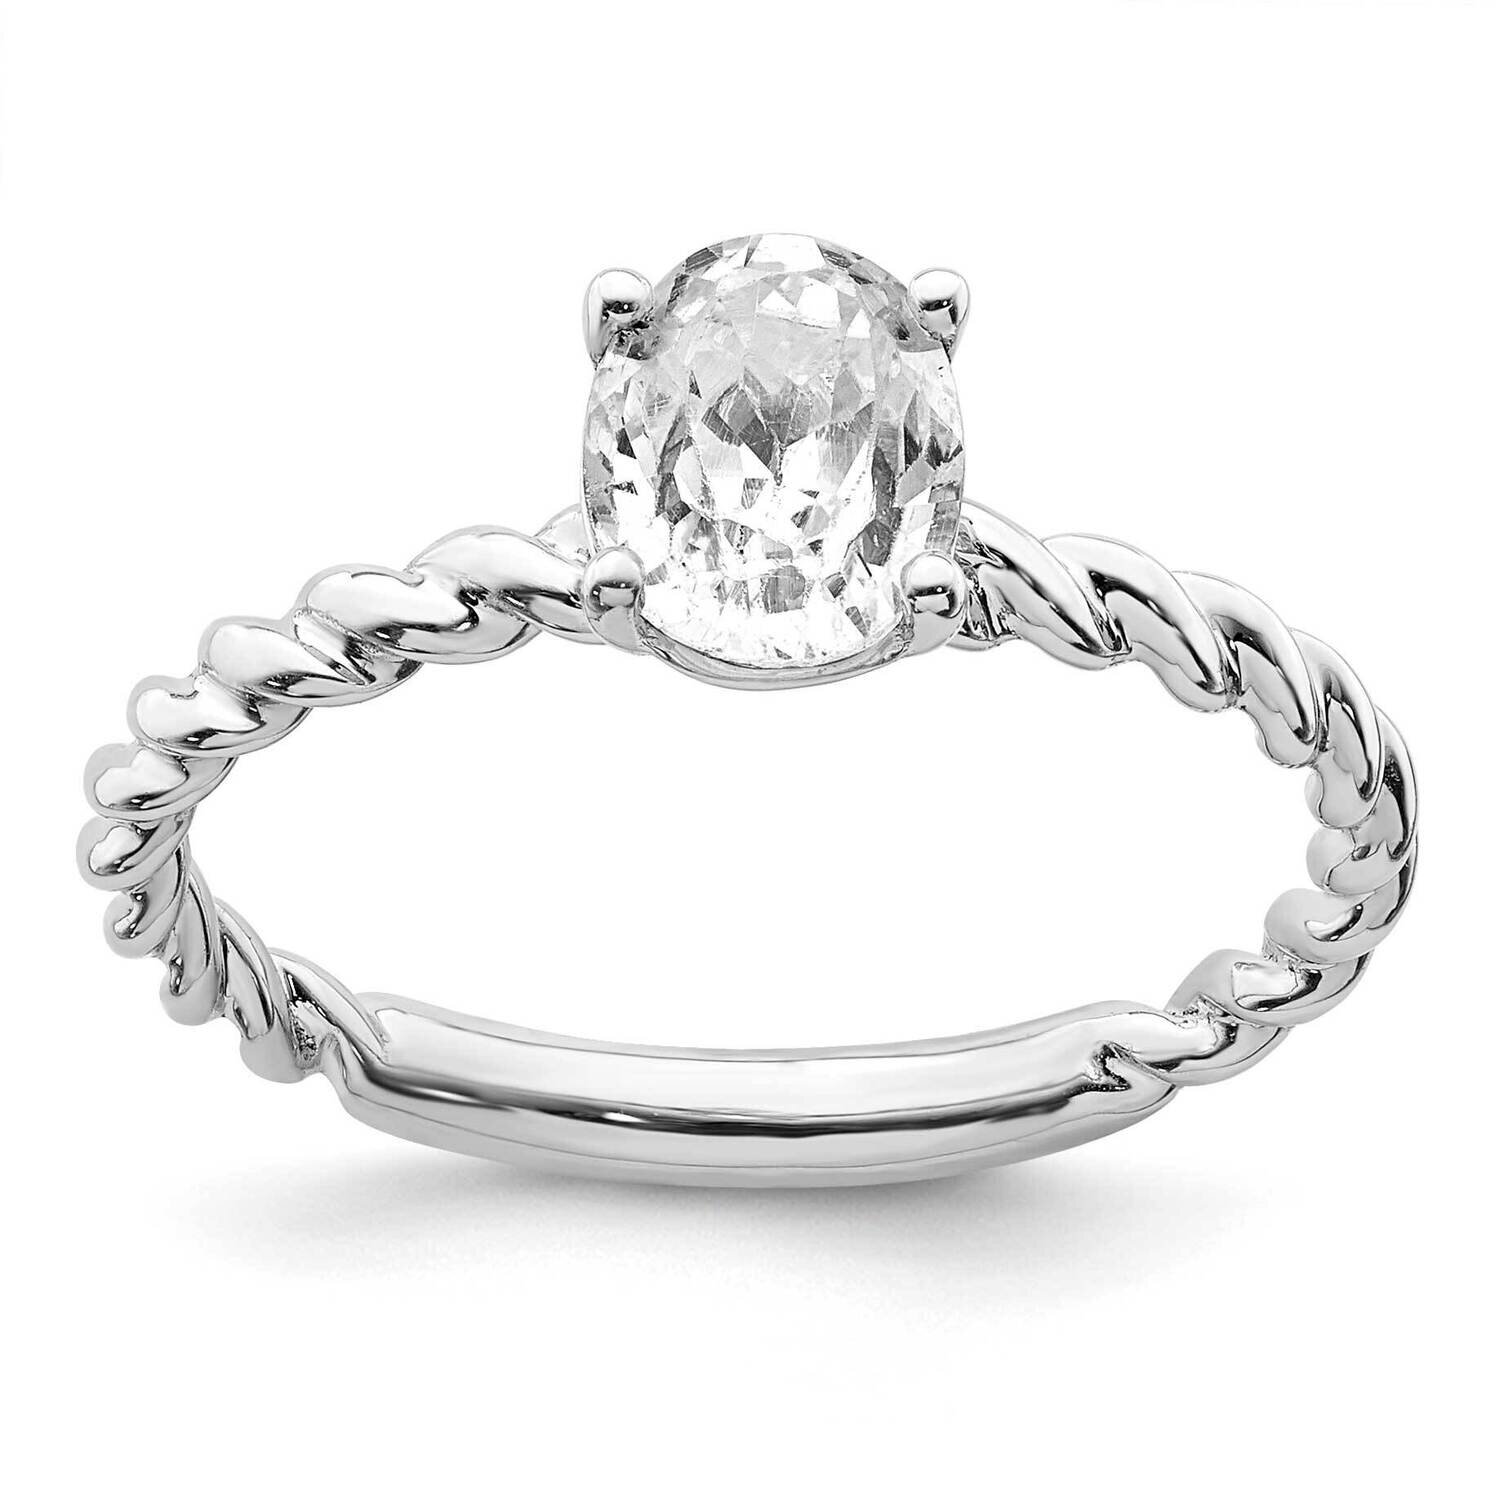 1 1/2ct. G H I True Light Oval Twisted Moissanite Solitaire Ring 14k White Gold RM6799-150-WMT